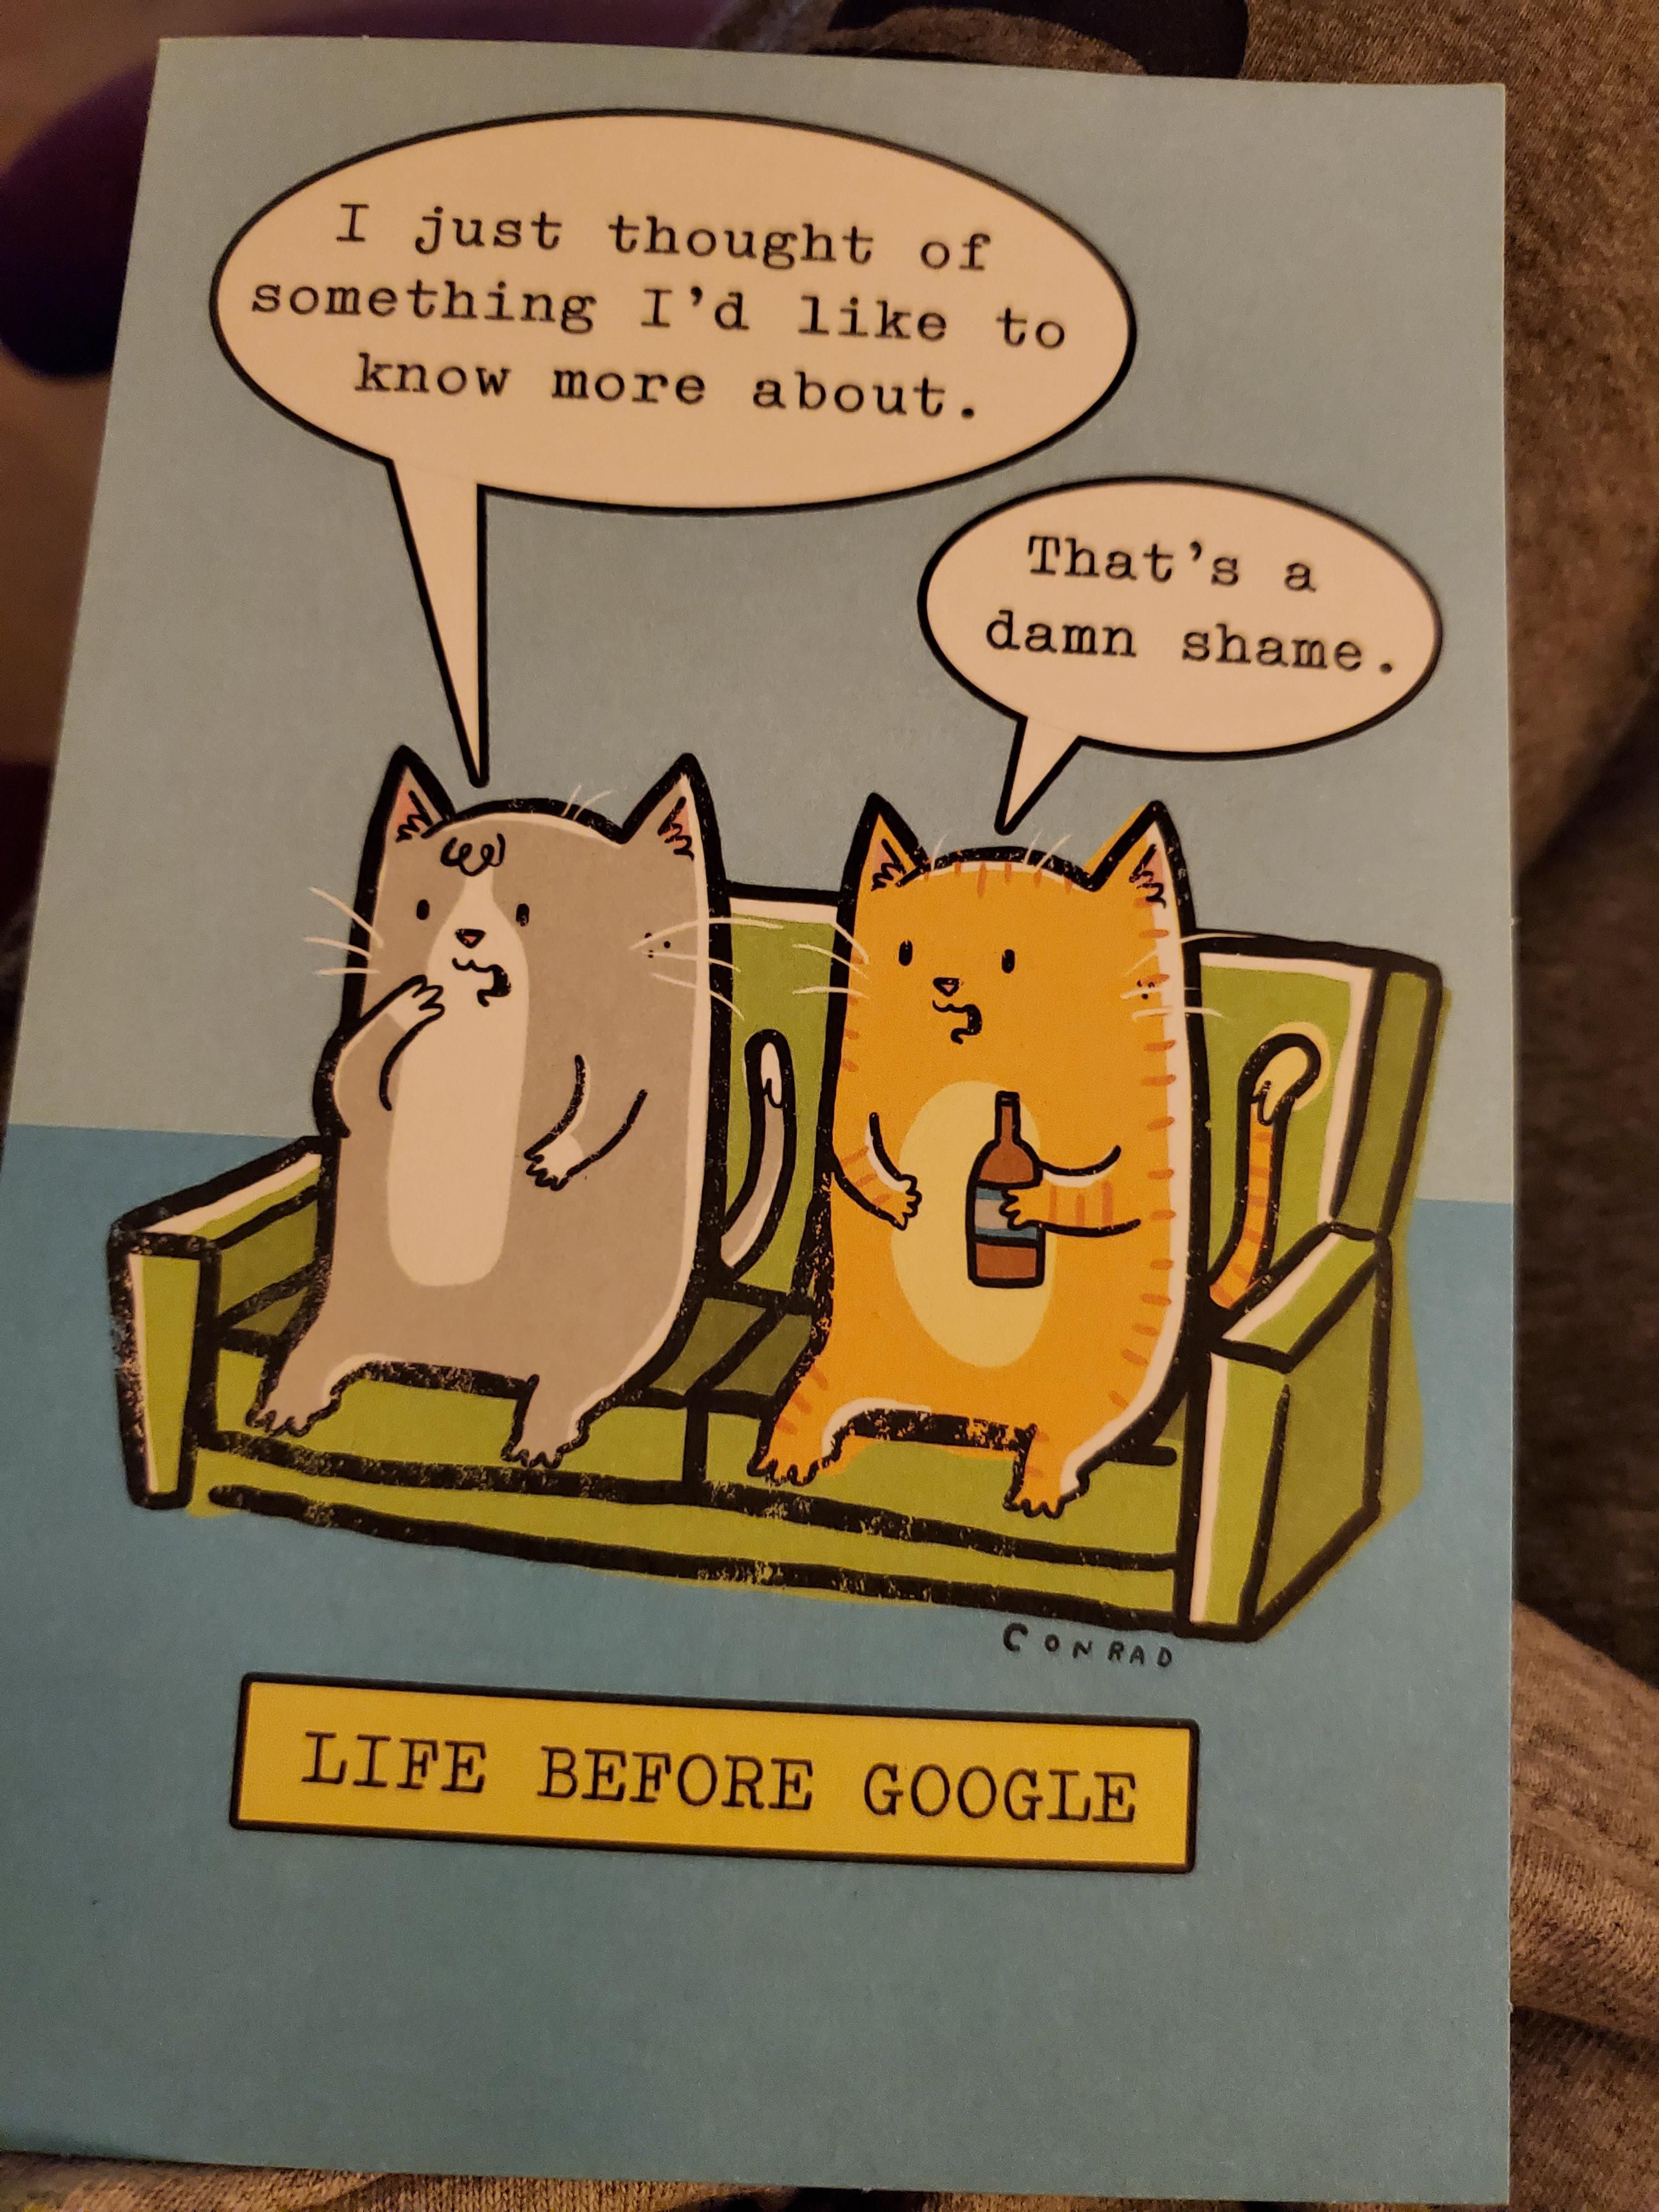 This card sent to me from my sister made me giggle.